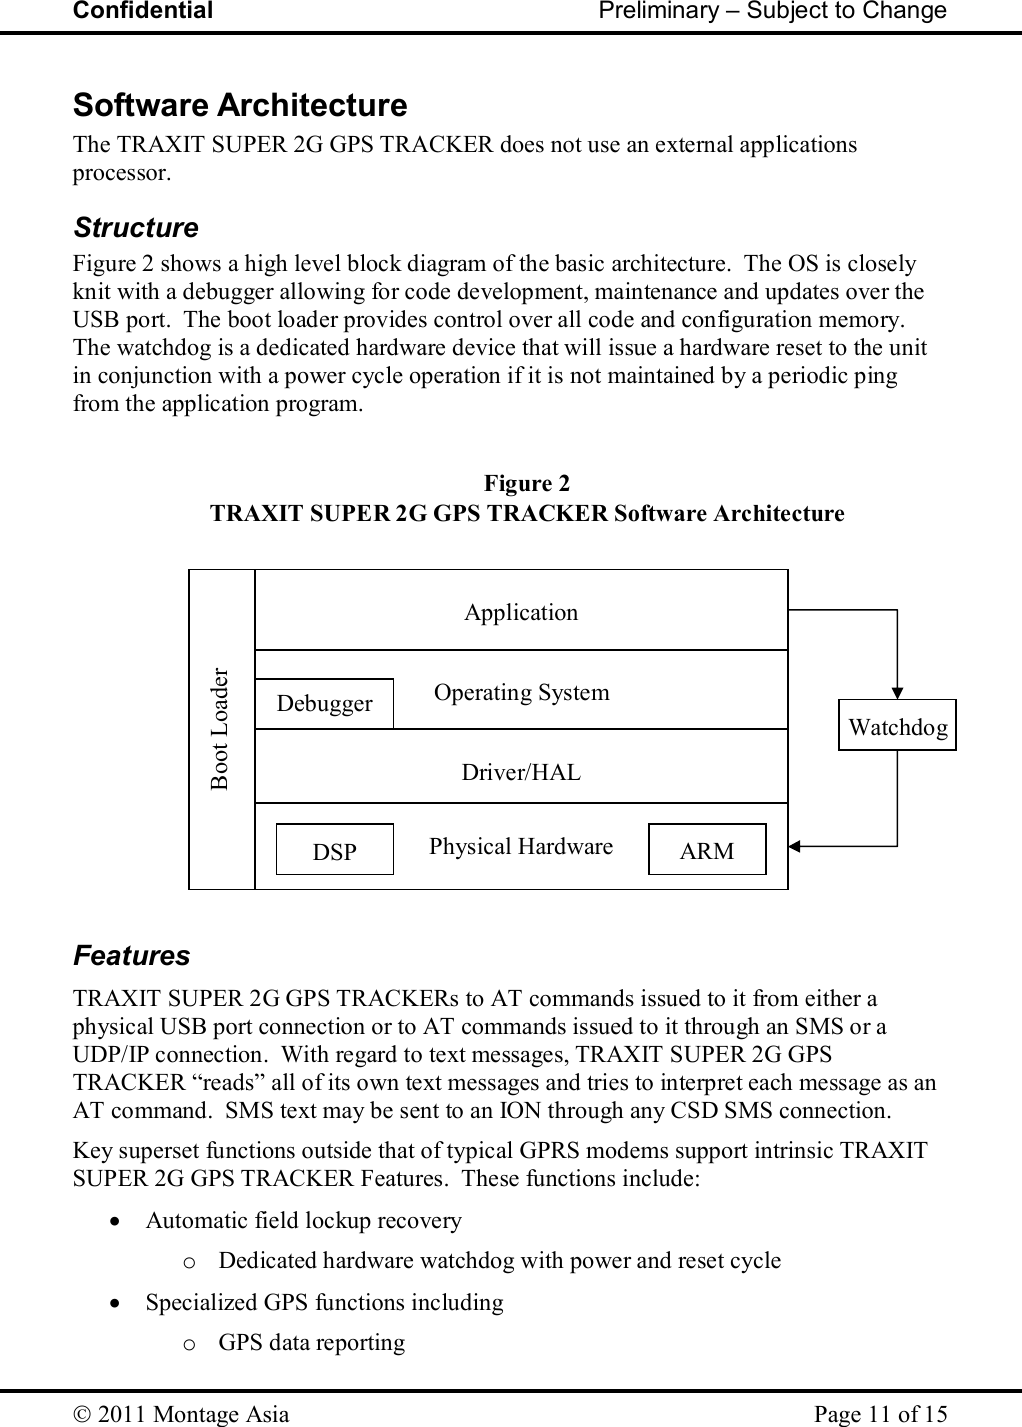 Confidential                                                         Preliminary – Subject to Change   2011 Montage Asia    Page 11 of 15   Physical Hardware Figure 2 TRAXIT SUPER 2G GPS TRACKER Software Architecture ARM DSP Debugger  Operating System  Application Boot Loader Watchdog  Driver/HAL Software Architecture The TRAXIT SUPER 2G GPS TRACKER does not use an external applications processor.  Structure Figure 2 shows a high level block diagram of the basic architecture.  The OS is closely knit with a debugger allowing for code development, maintenance and updates over the USB port.  The boot loader provides control over all code and configuration memory.  The watchdog is a dedicated hardware device that will issue a hardware reset to the unit in conjunction with a power cycle operation if it is not maintained by a periodic ping from the application program.               Features TRAXIT SUPER 2G GPS TRACKERs to AT commands issued to it from either a physical USB port connection or to AT commands issued to it through an SMS or a UDP/IP connection.  With regard to text messages, TRAXIT SUPER 2G GPS TRACKER “reads” all of its own text messages and tries to interpret each message as an AT command.  SMS text may be sent to an ION through any CSD SMS connection. Key superset functions outside that of typical GPRS modems support intrinsic TRAXIT SUPER 2G GPS TRACKER Features.  These functions include:  Automatic field lockup recovery o Dedicated hardware watchdog with power and reset cycle  Specialized GPS functions including o GPS data reporting 